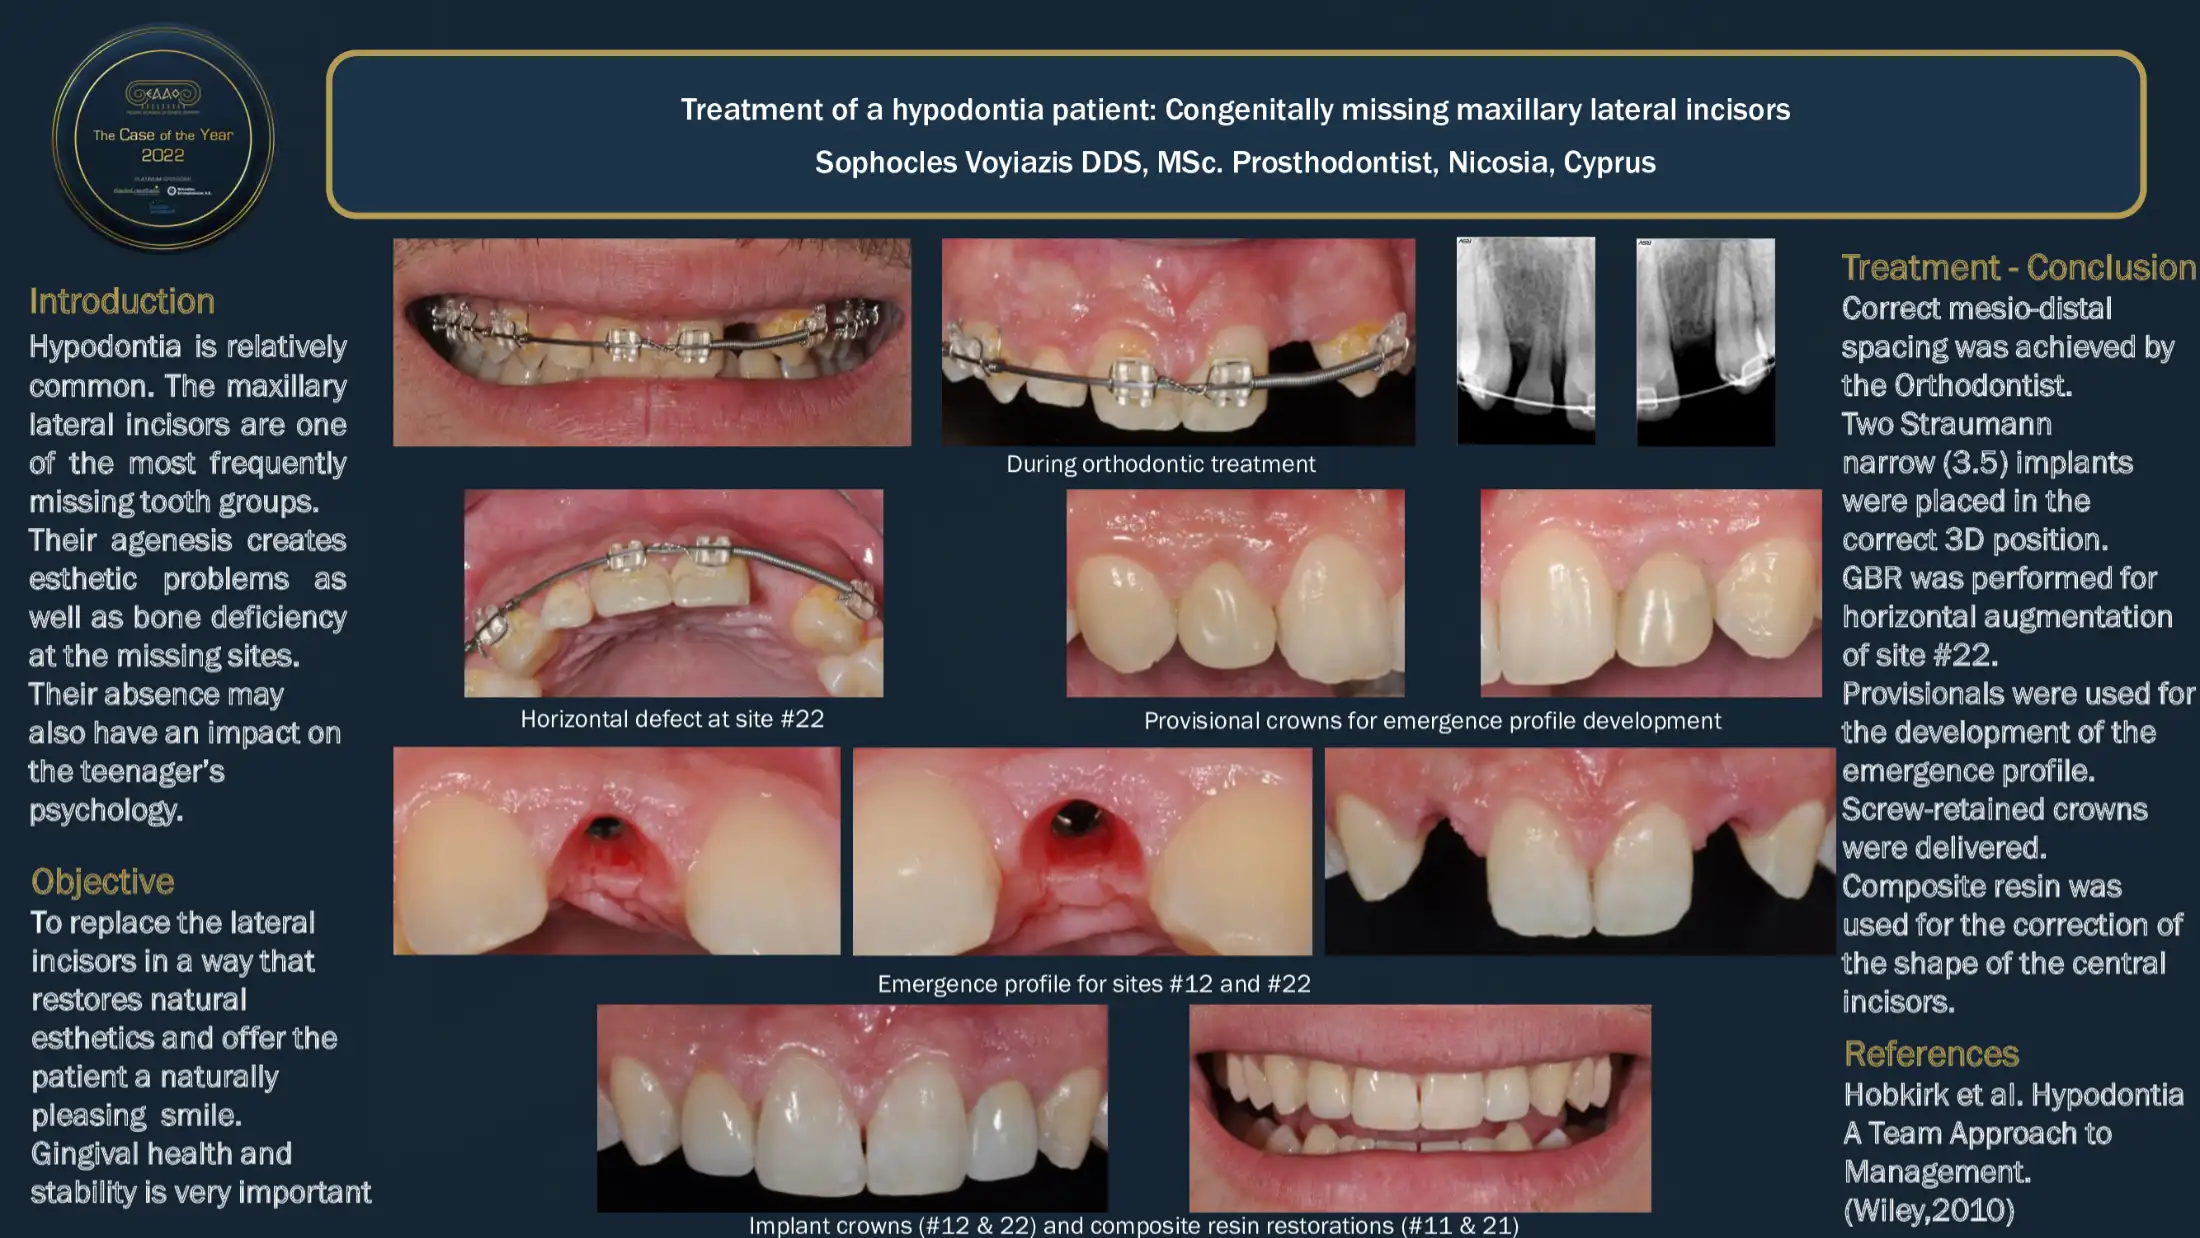 Treatment of a hypodontia patient: Congenitally missing maxillary lateral incisors.